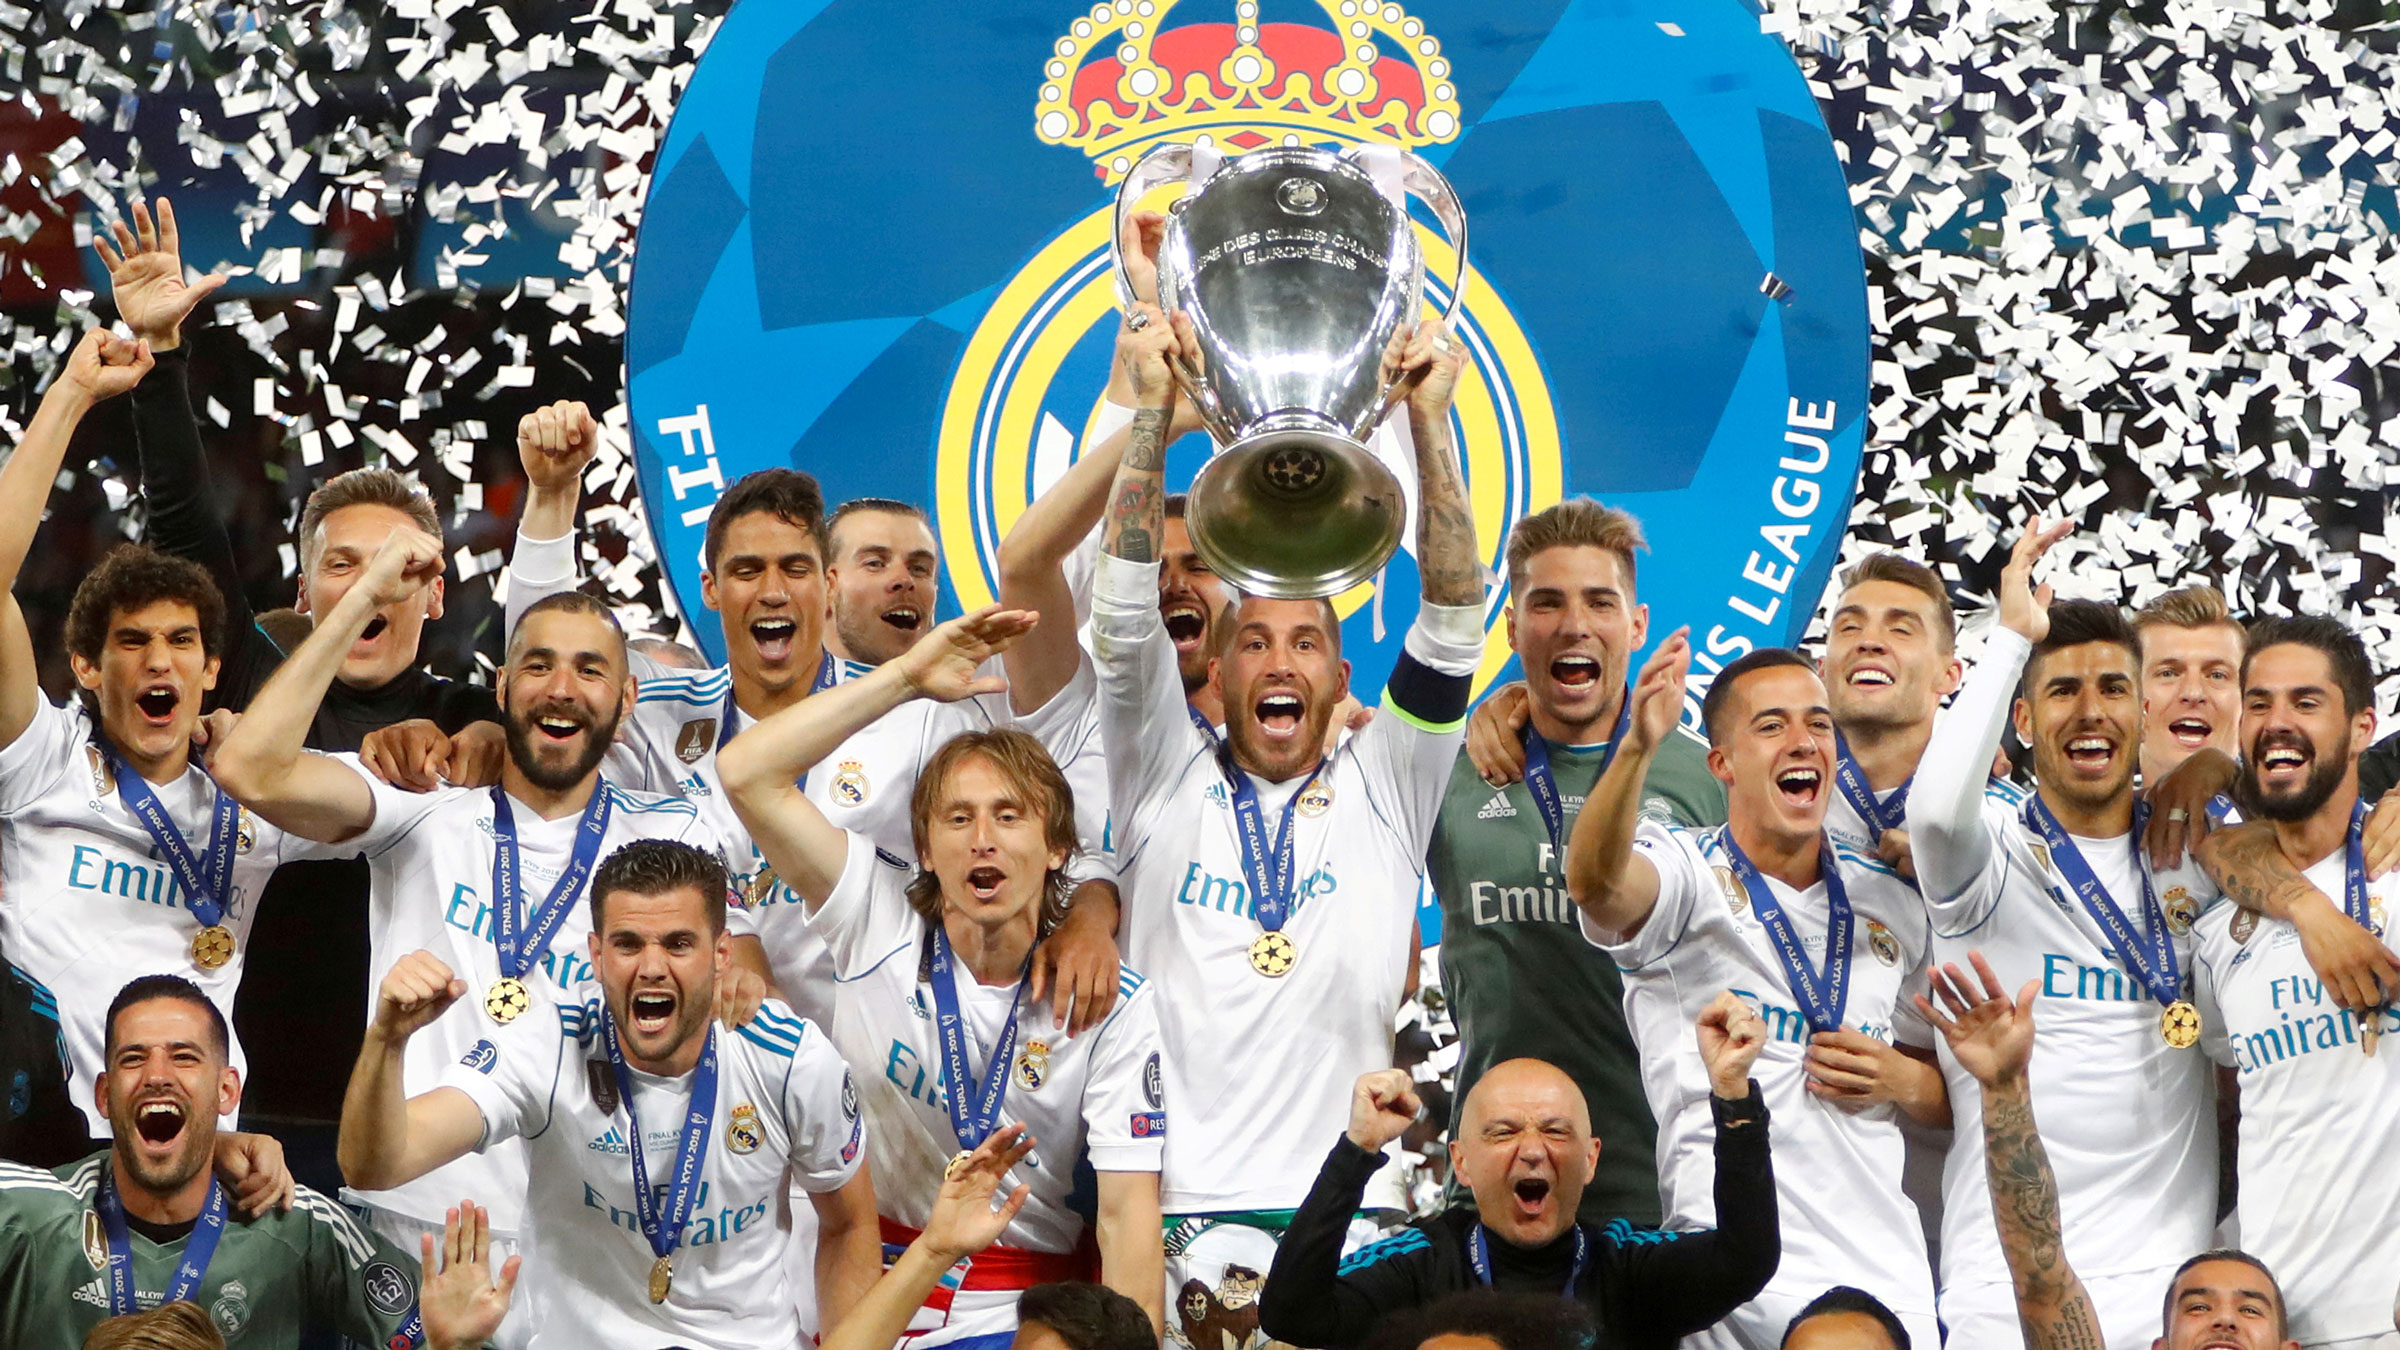 Three-peats are rare, but Real Madrid was able to win its third straight Champions League in 2018.